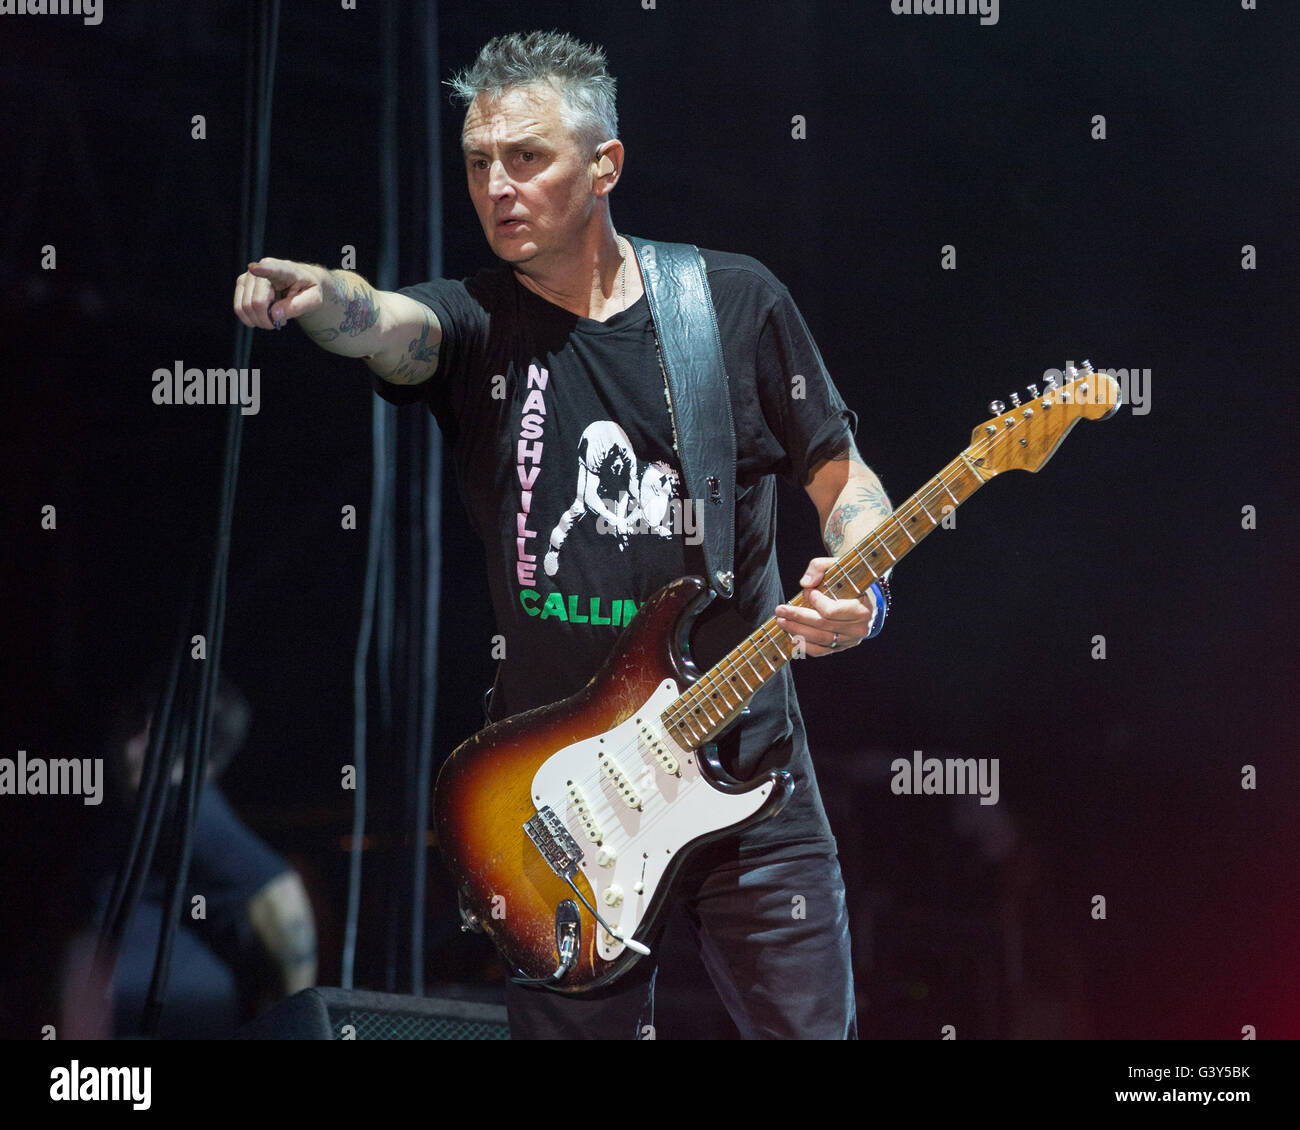 Image result for mike mccready shooting guitar